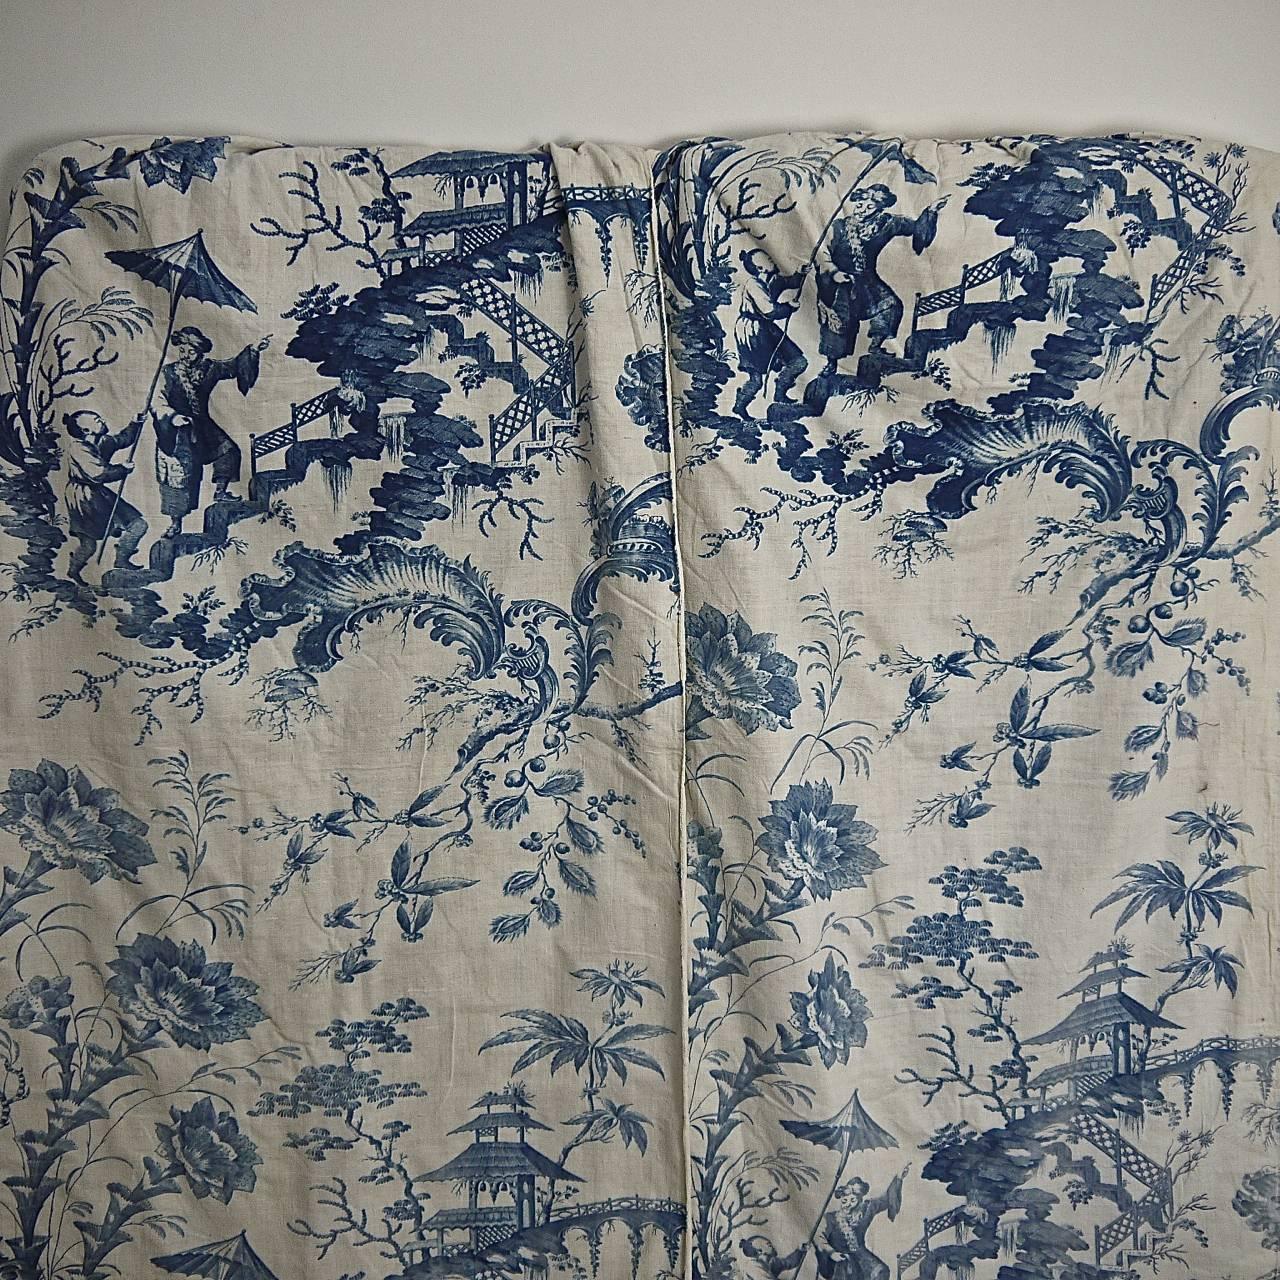 Pair of 18th Century French Antique Chinoiserie Toile Blue and White Curtains 3